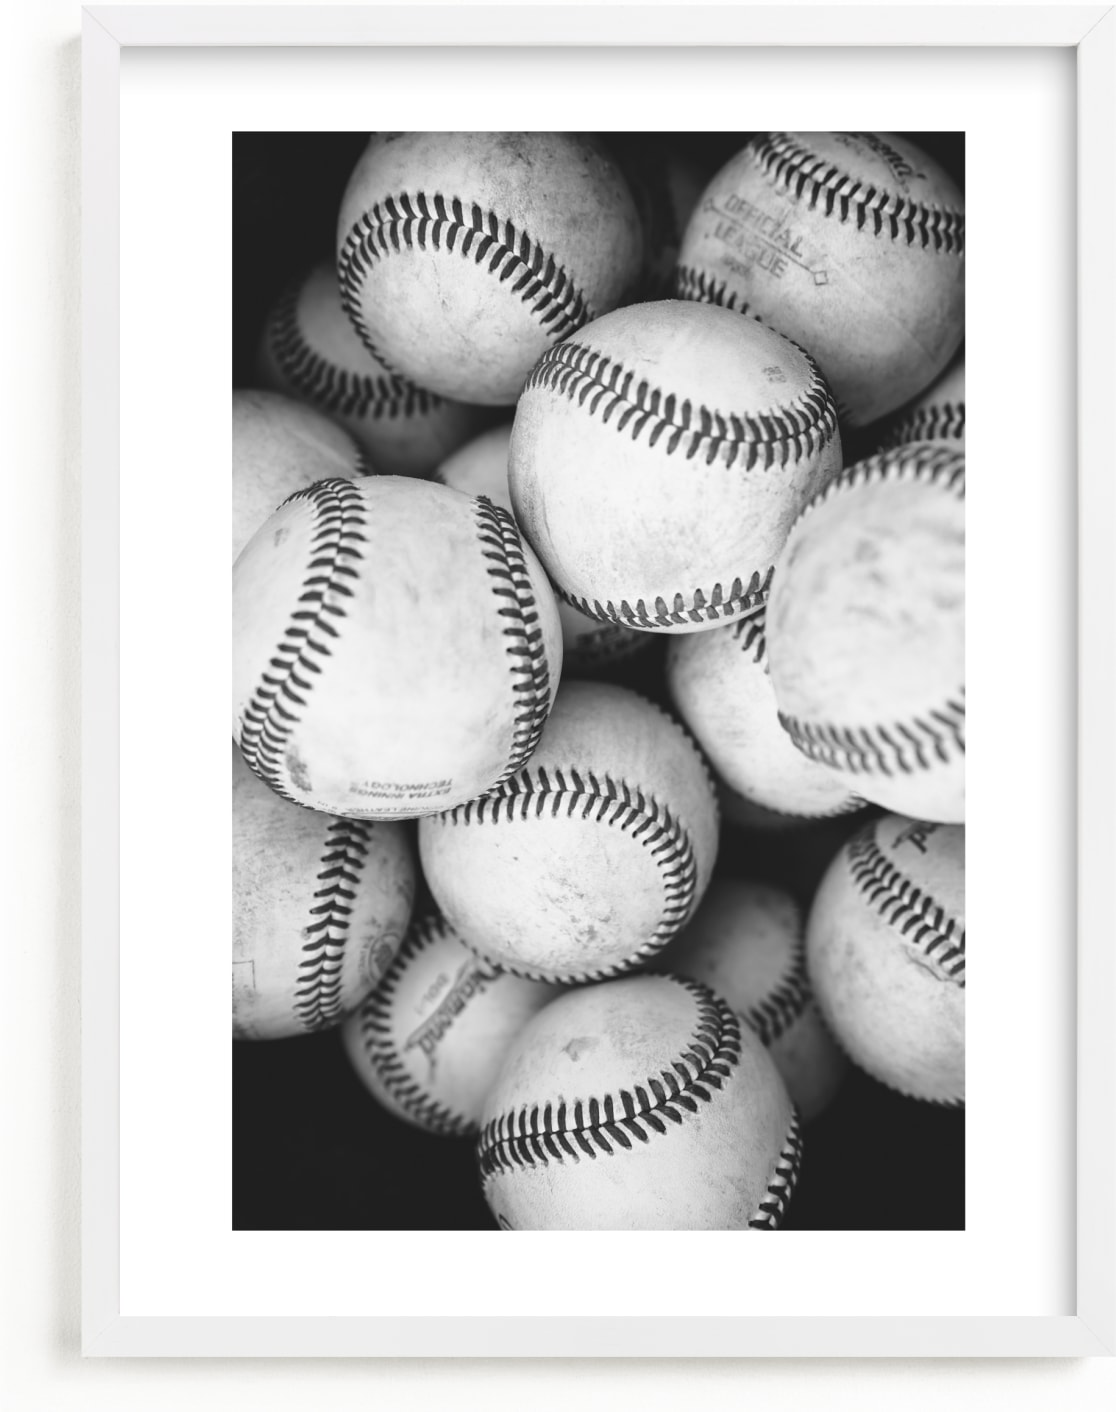 This is a black and white art by Kamala Nahas called Play Ball.